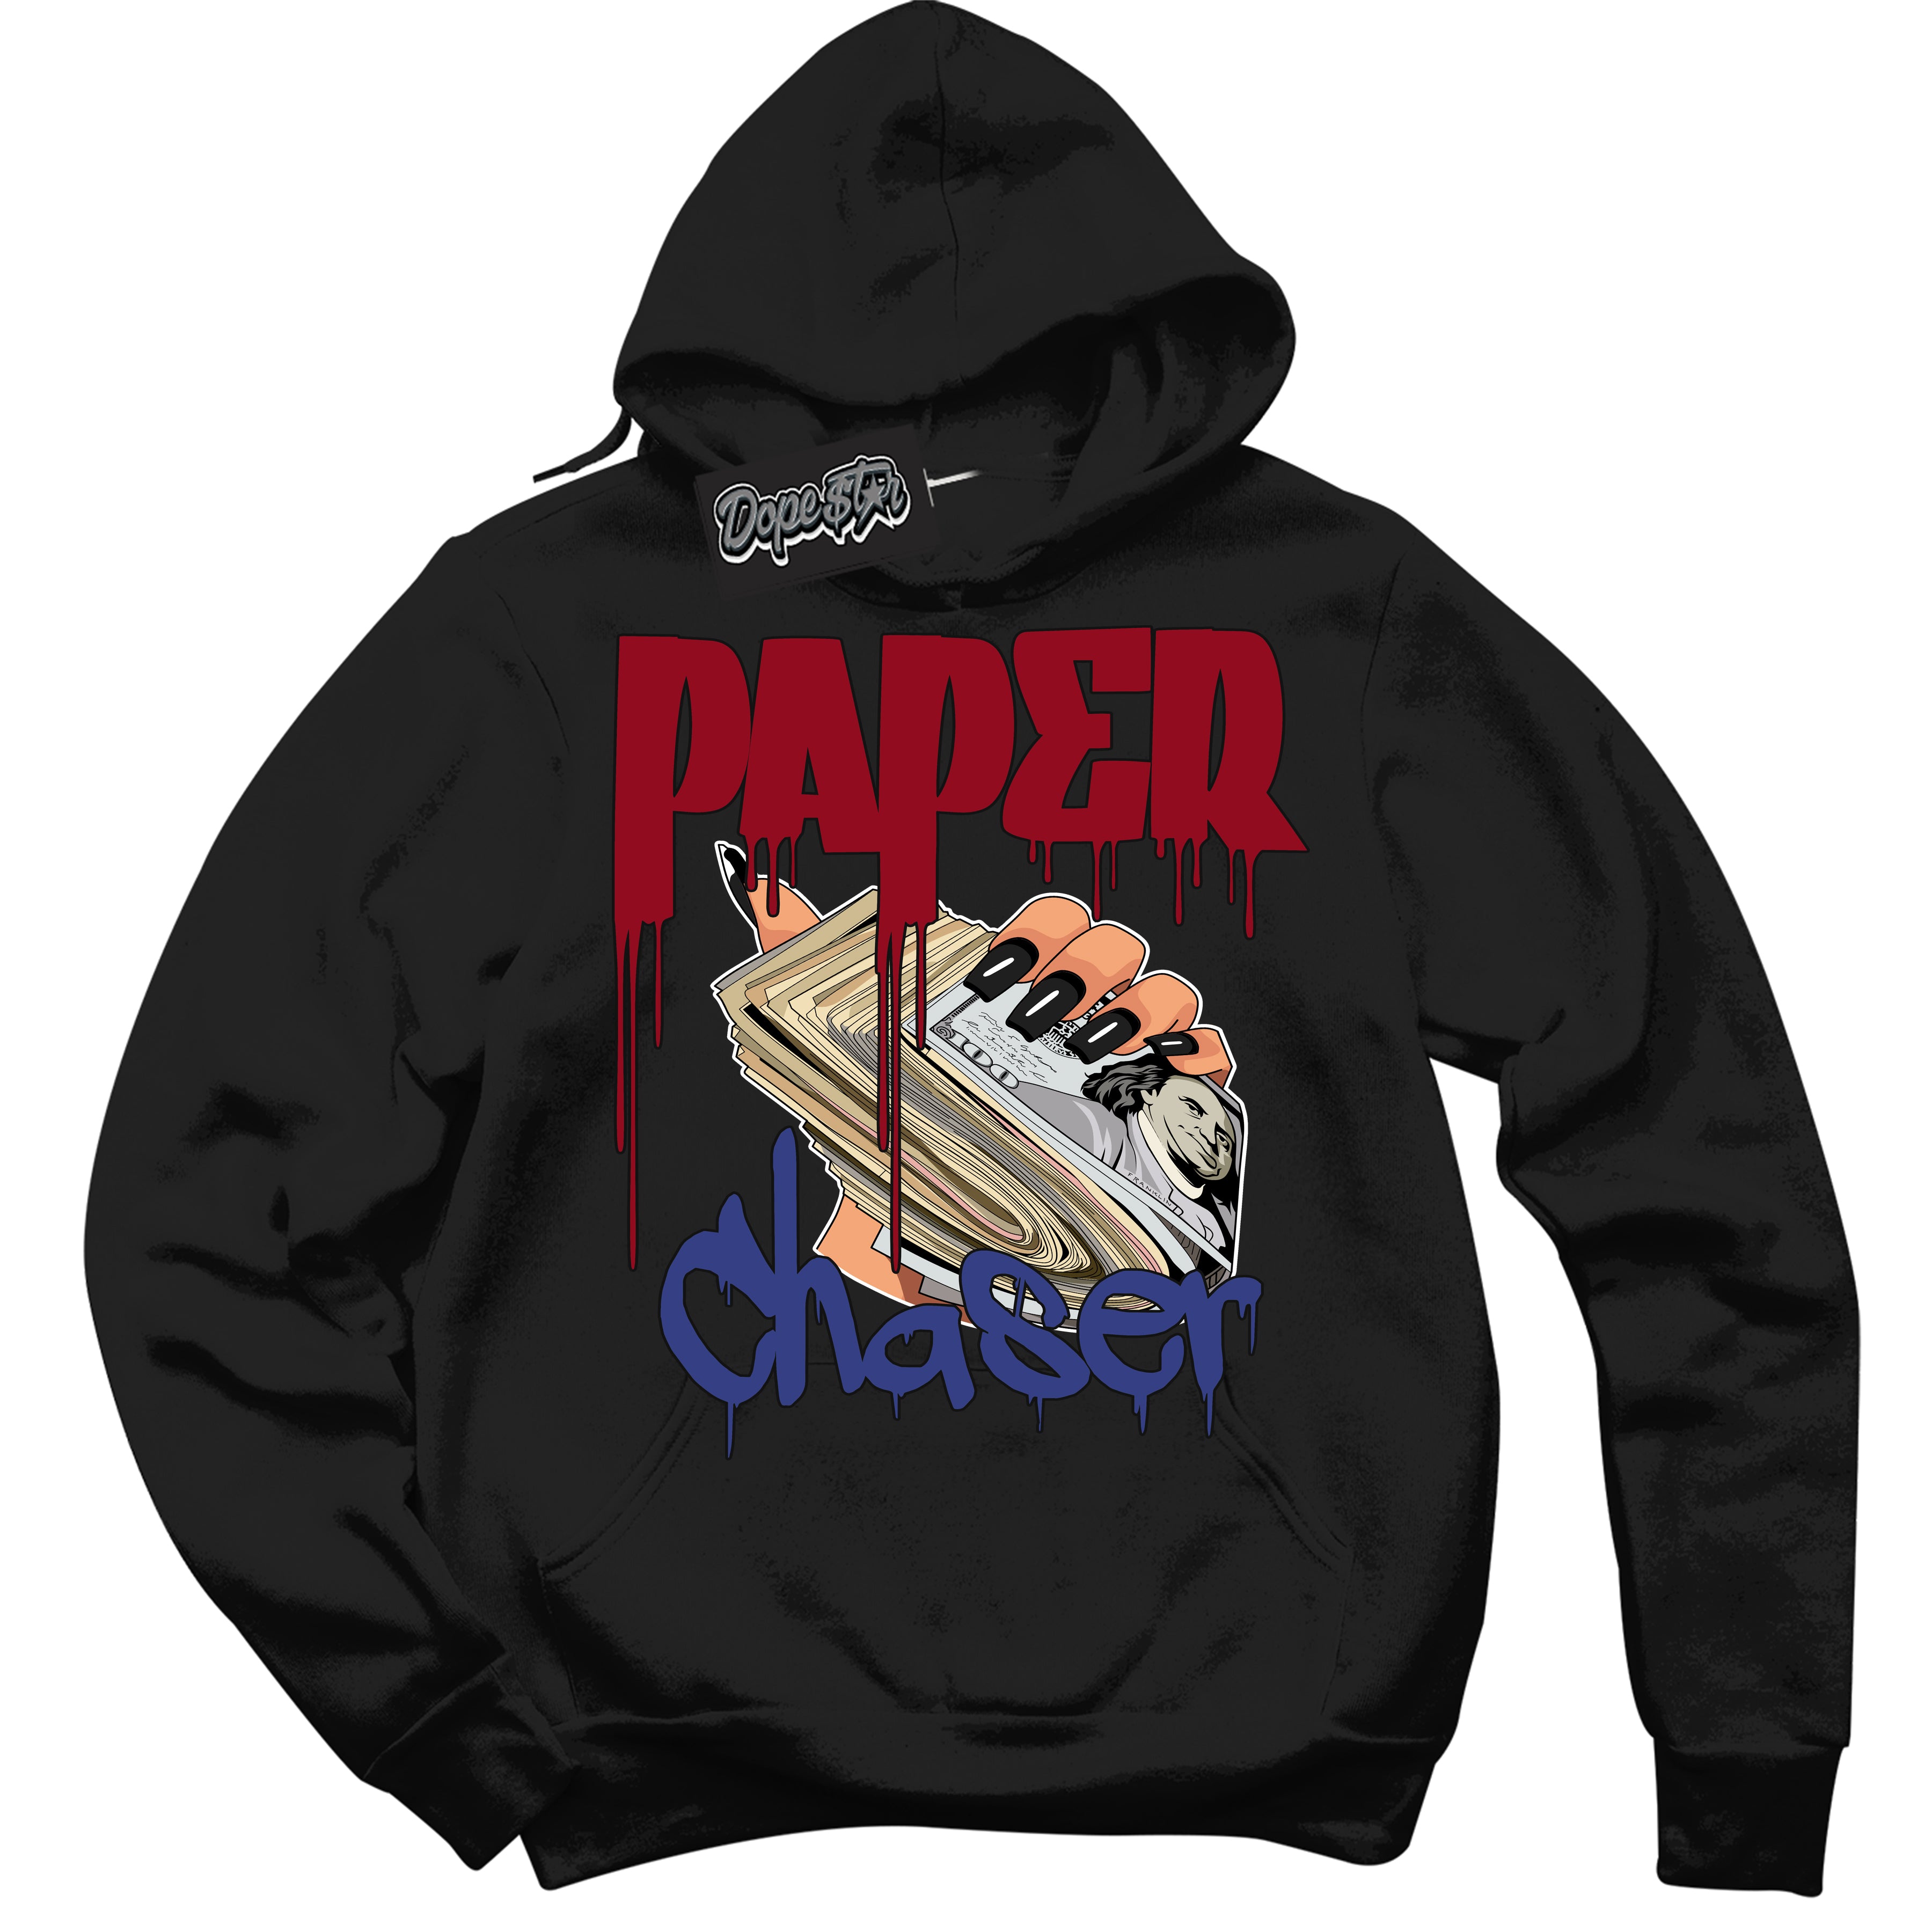 Cool Black Hoodie with “ Paper Chaser ”  design that Perfectly Matches Playoffs 8s Sneakers.